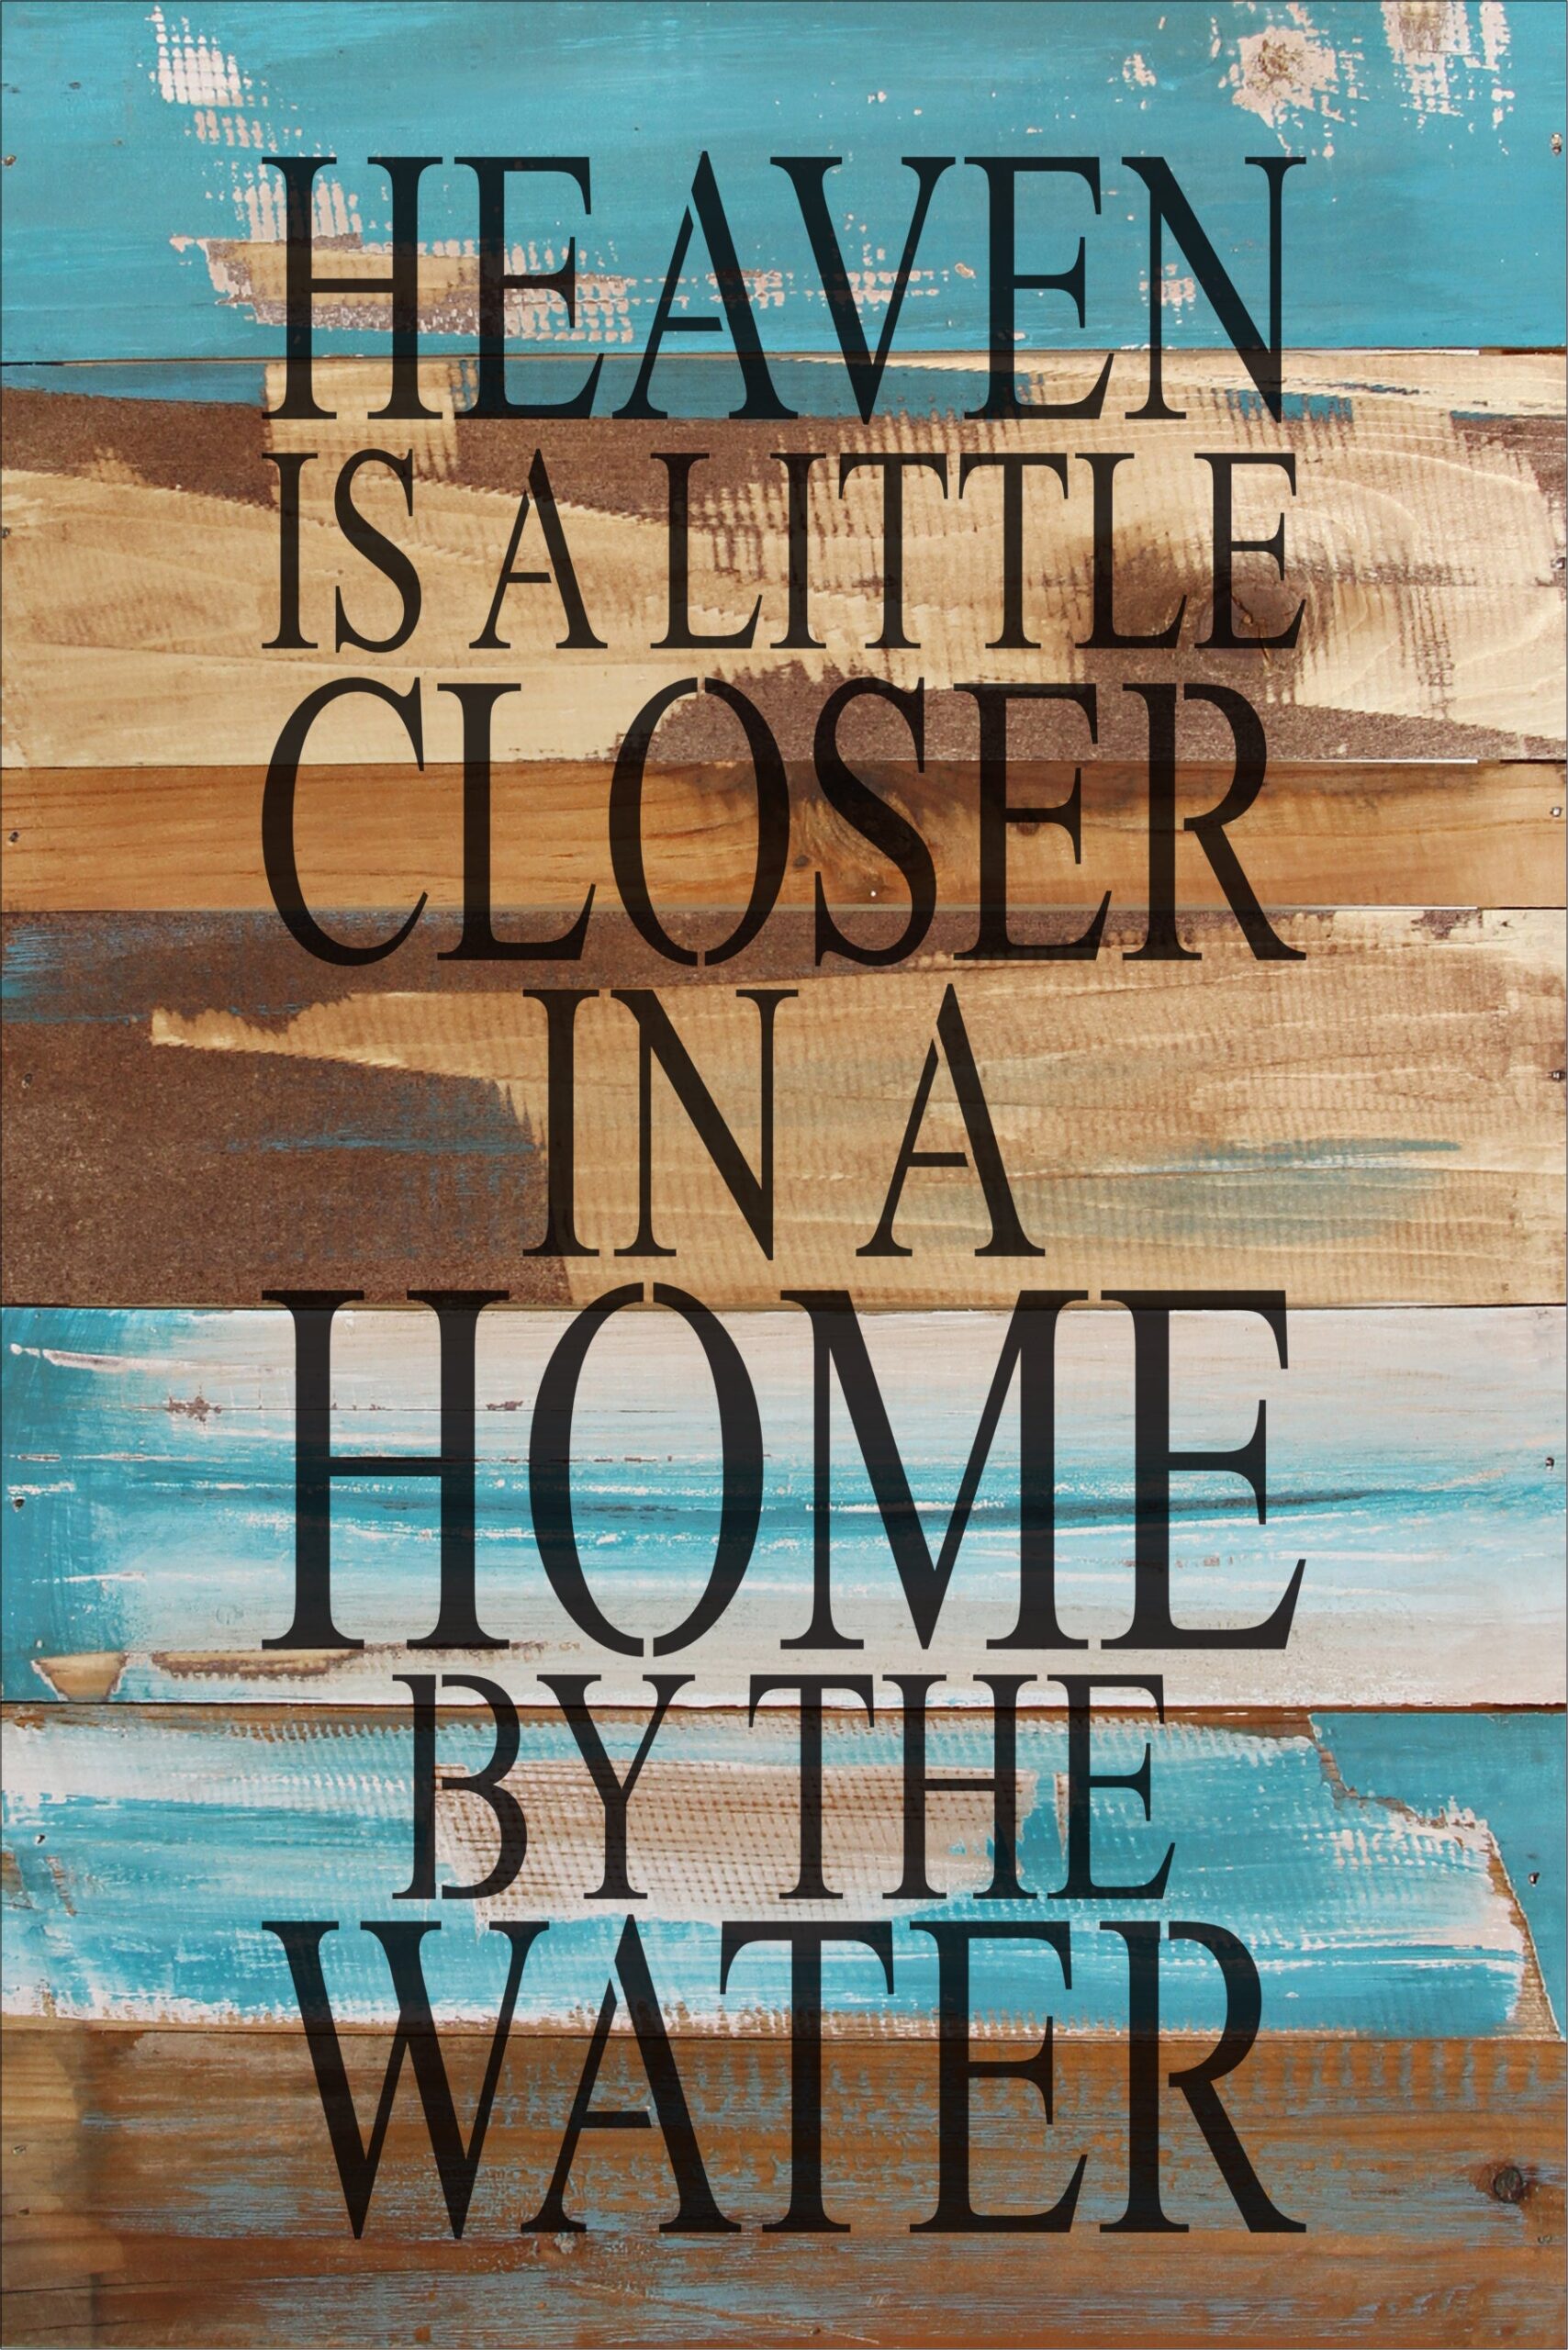 Heaven is a little closer in a home by the water / 12x18" Reclaimed Wood Wall Art